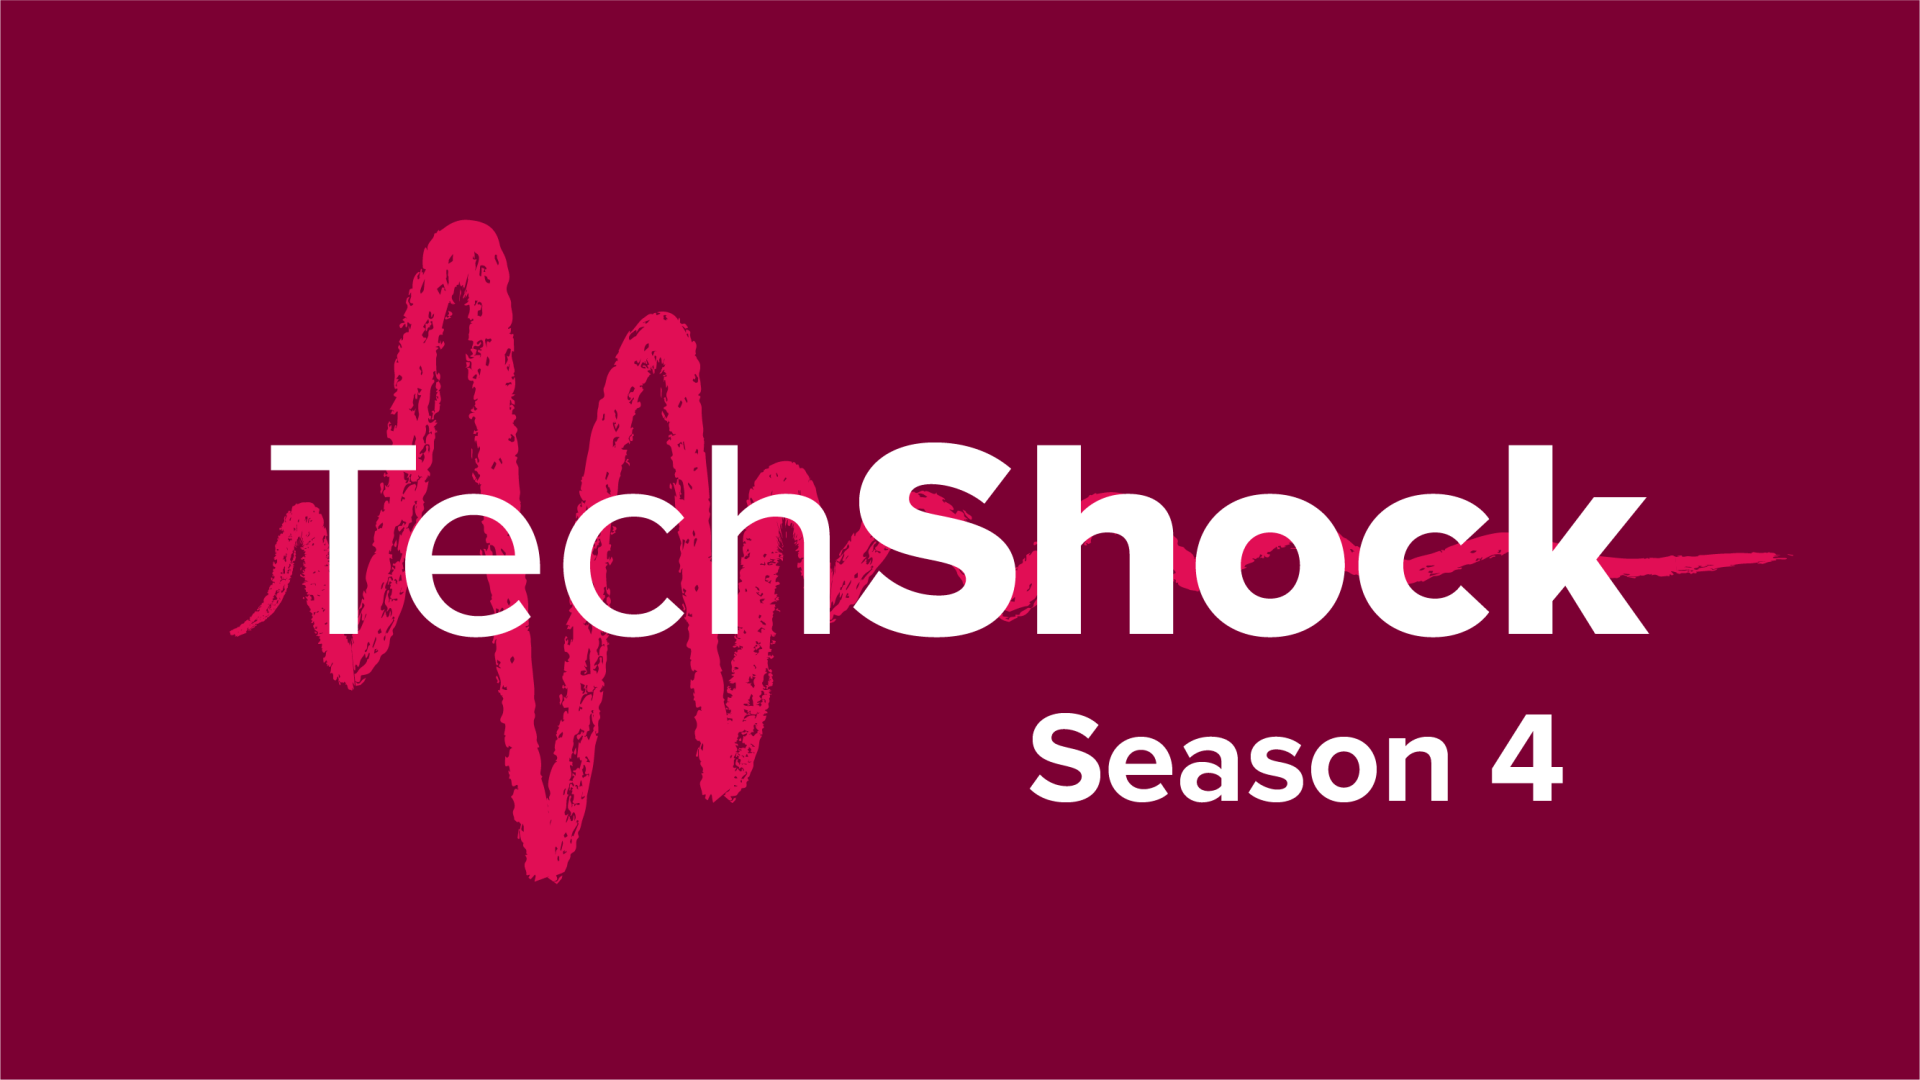 The Tech Shock podcast returns with season 4